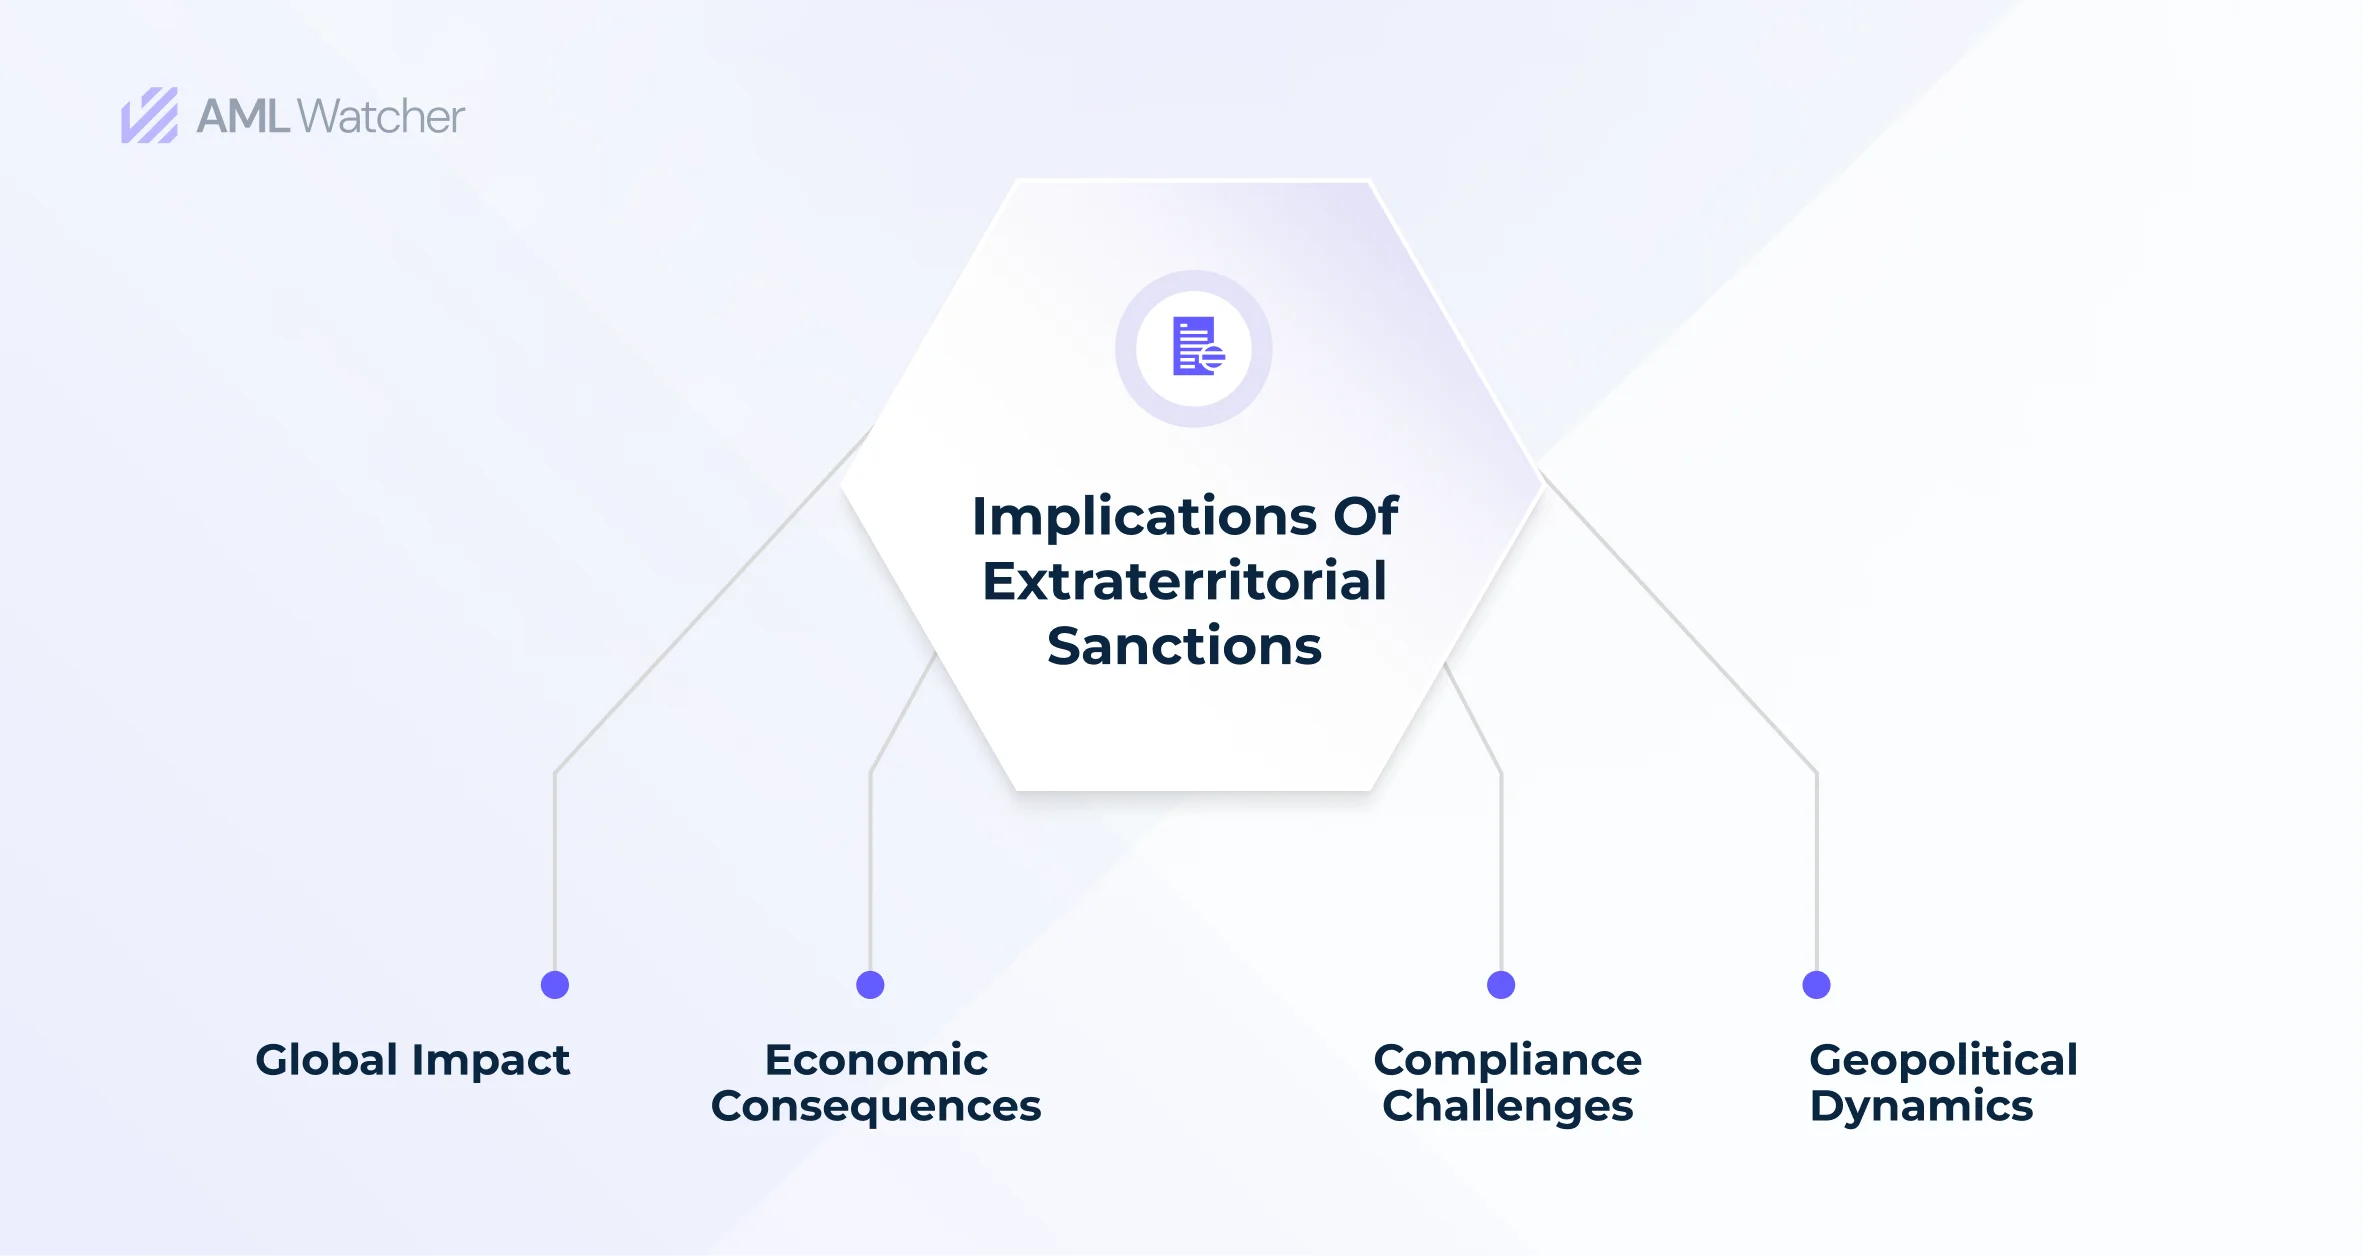 Given infographic depicts the Implications of Extraterritorial Sanctions